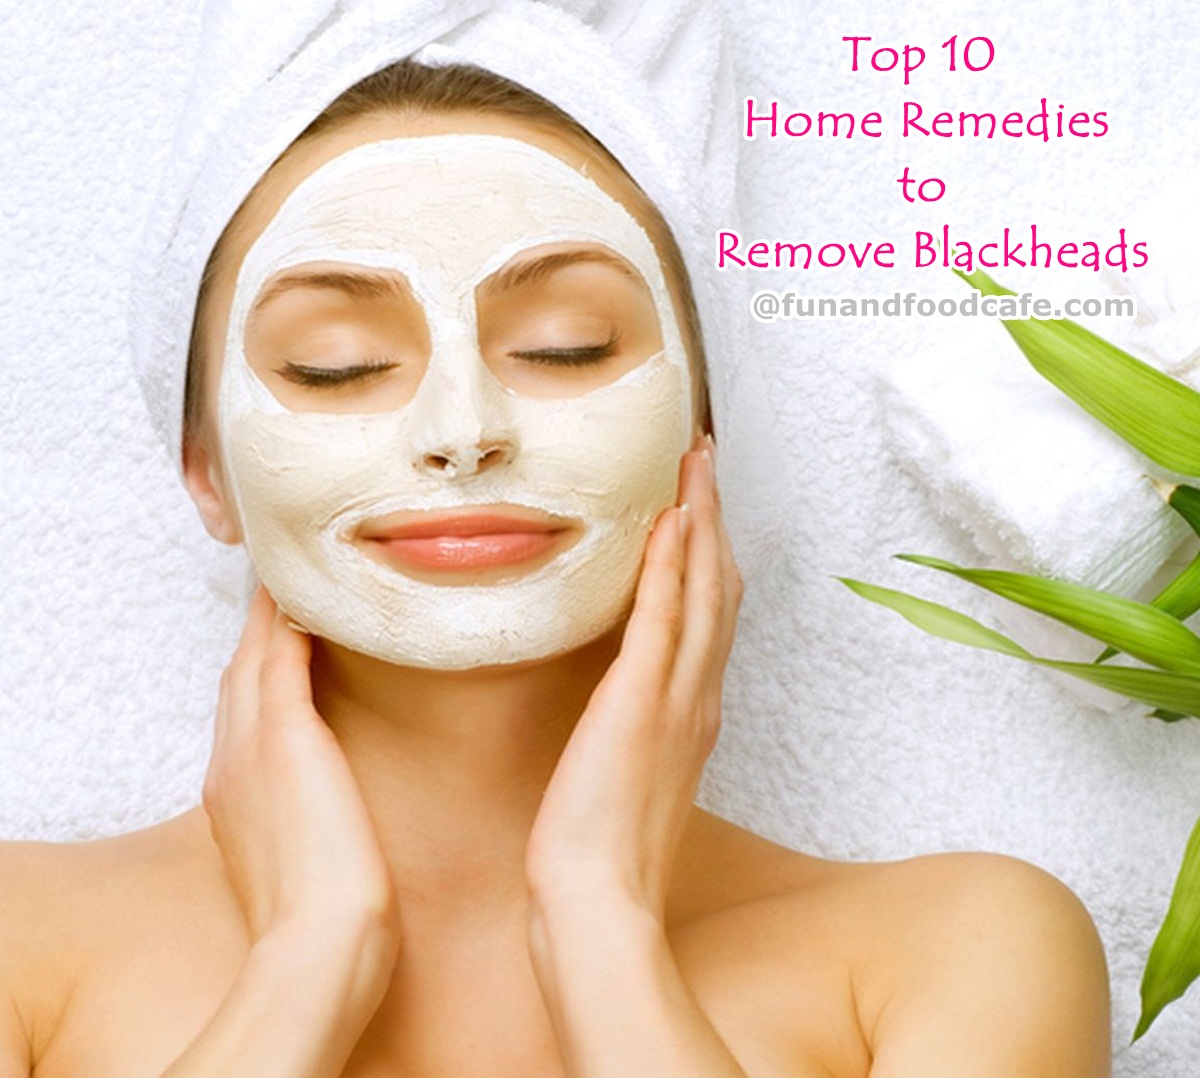 Remedies For Blackheads | Fun and Food Cafe